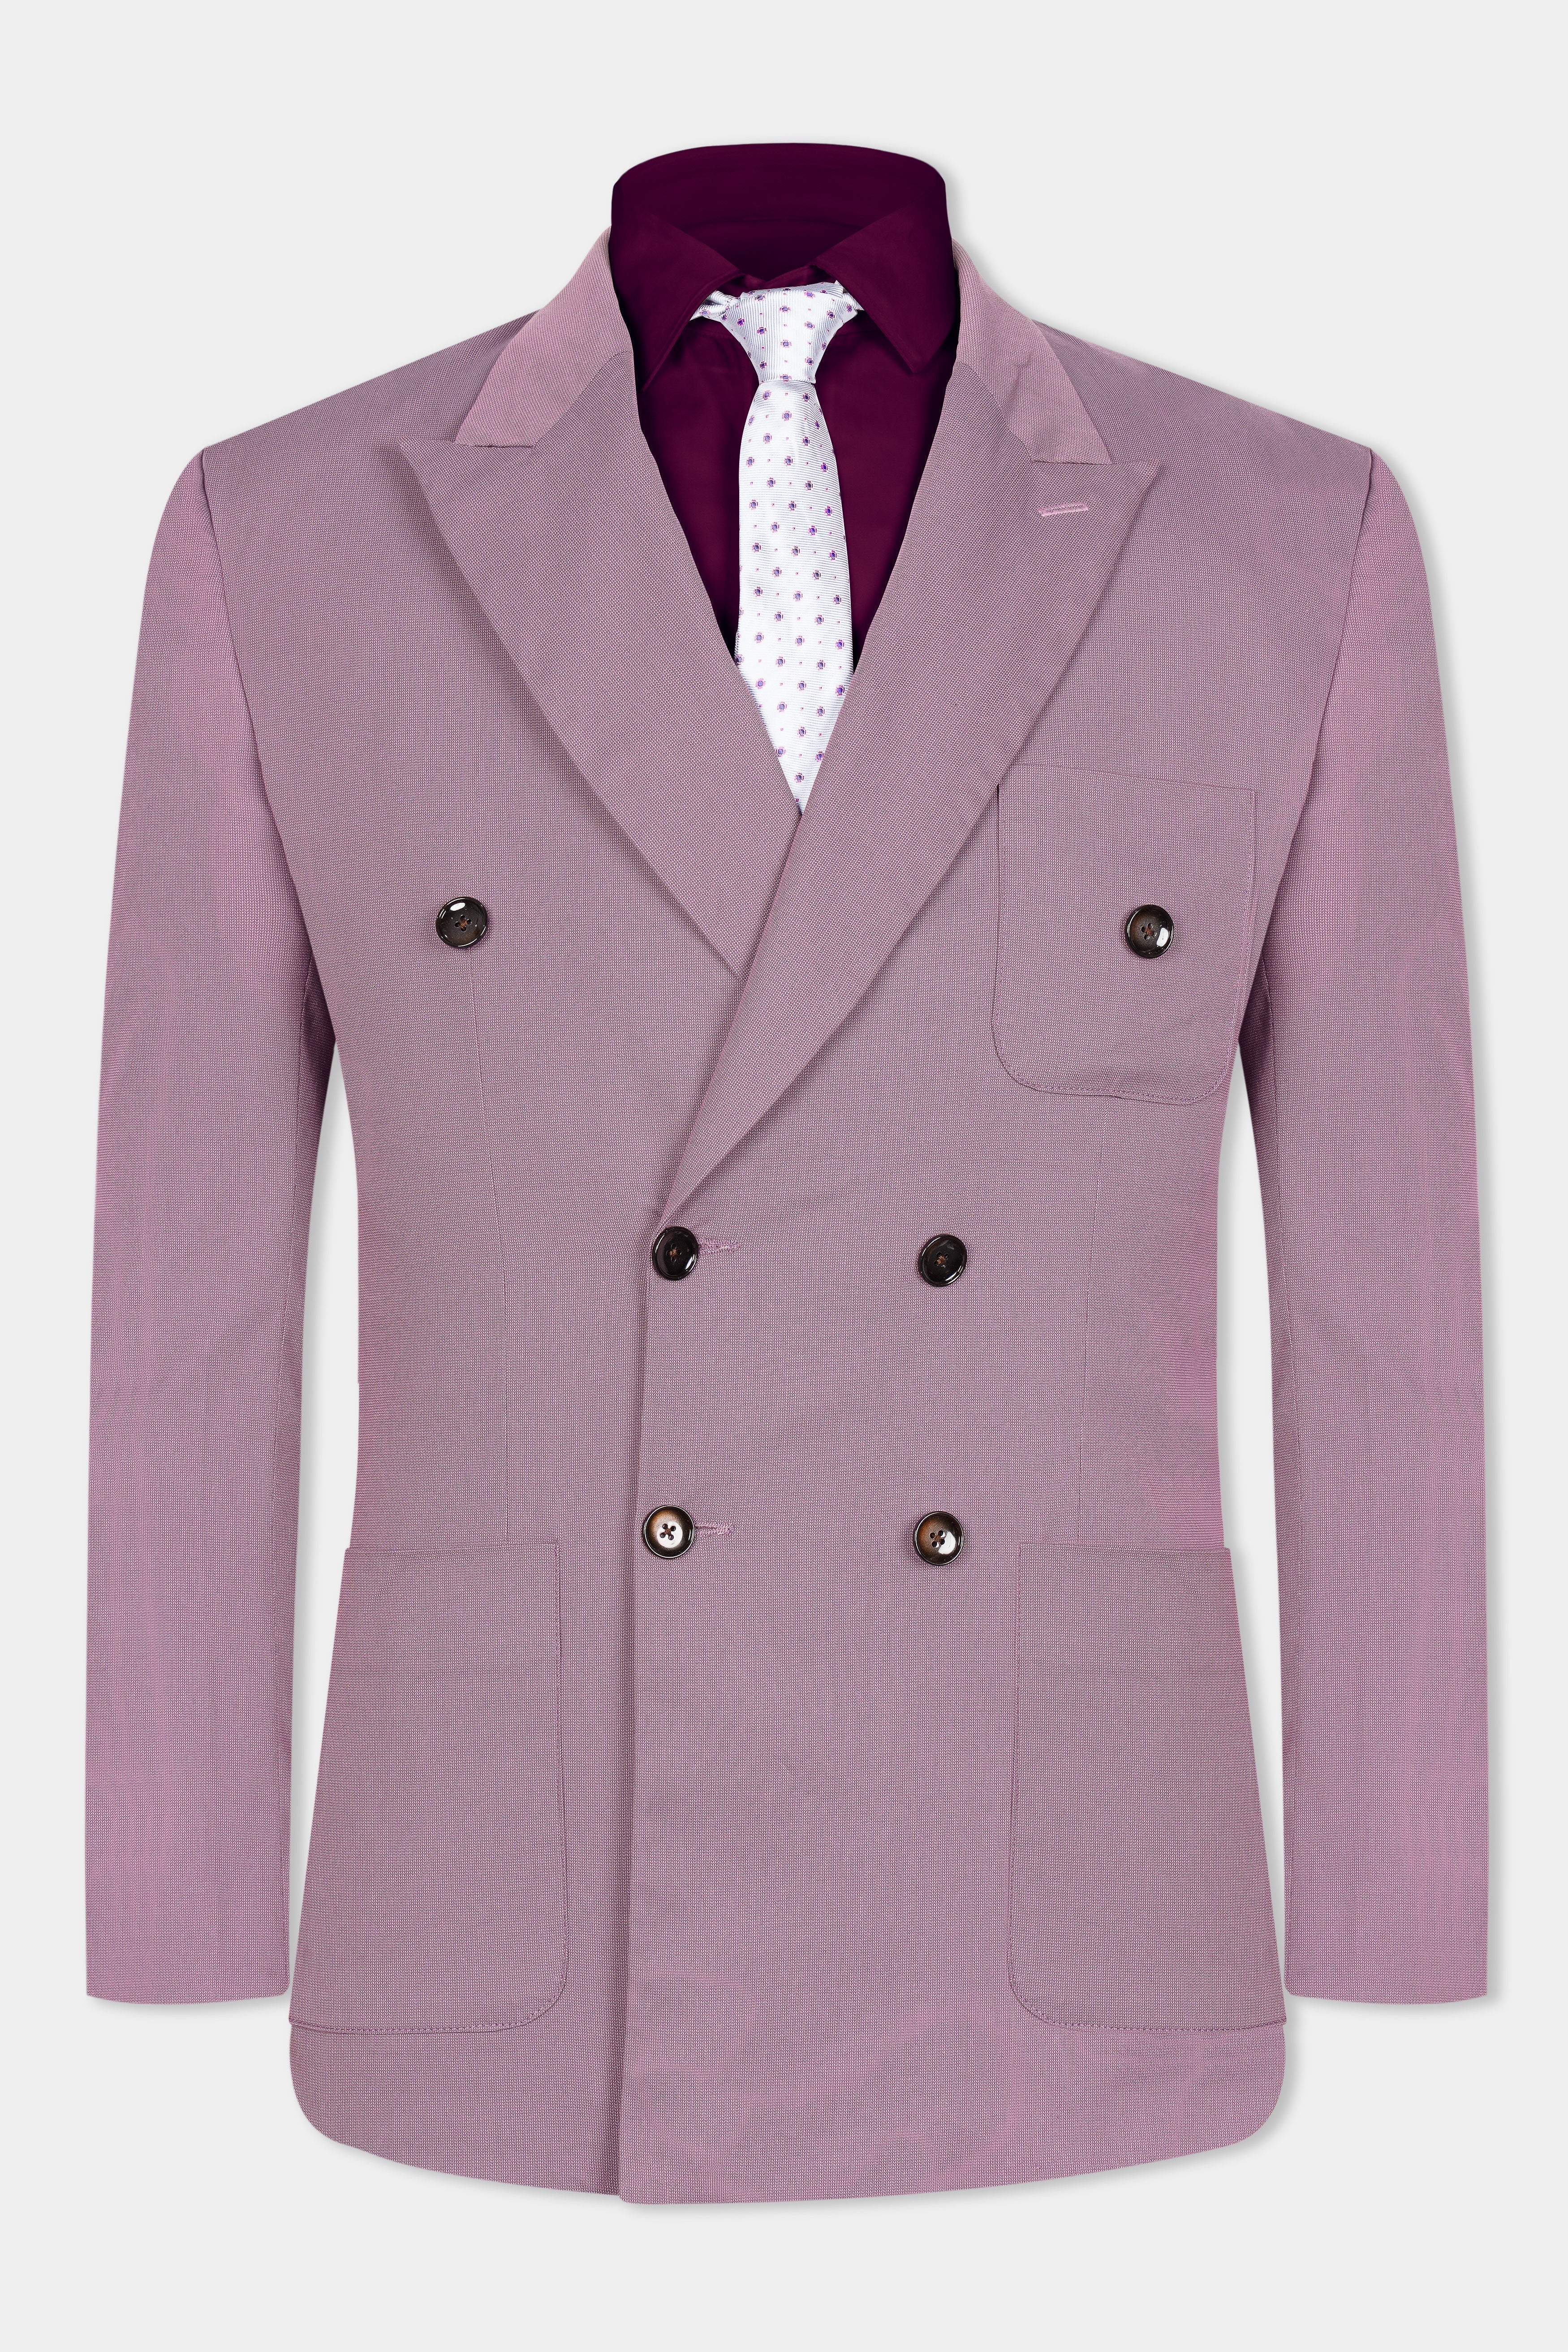 Orchid Lavender Premium Cotton Double Breasted Sports Blazer BL3071-DB-PP-36, BL3071-DB-PP-38, BL3071-DB-PP-40, BL3071-DB-PP-42, BL3071-DB-PP-44, BL3071-DB-PP-46, BL3071-DB-PP-48, BL3071-DB-PP-50, BL3071-DB-PP-52, BL3071-DB-PP-54, BL3071-DB-PP-56, BL3071-DB-PP-58, BL3071-DB-PP-60